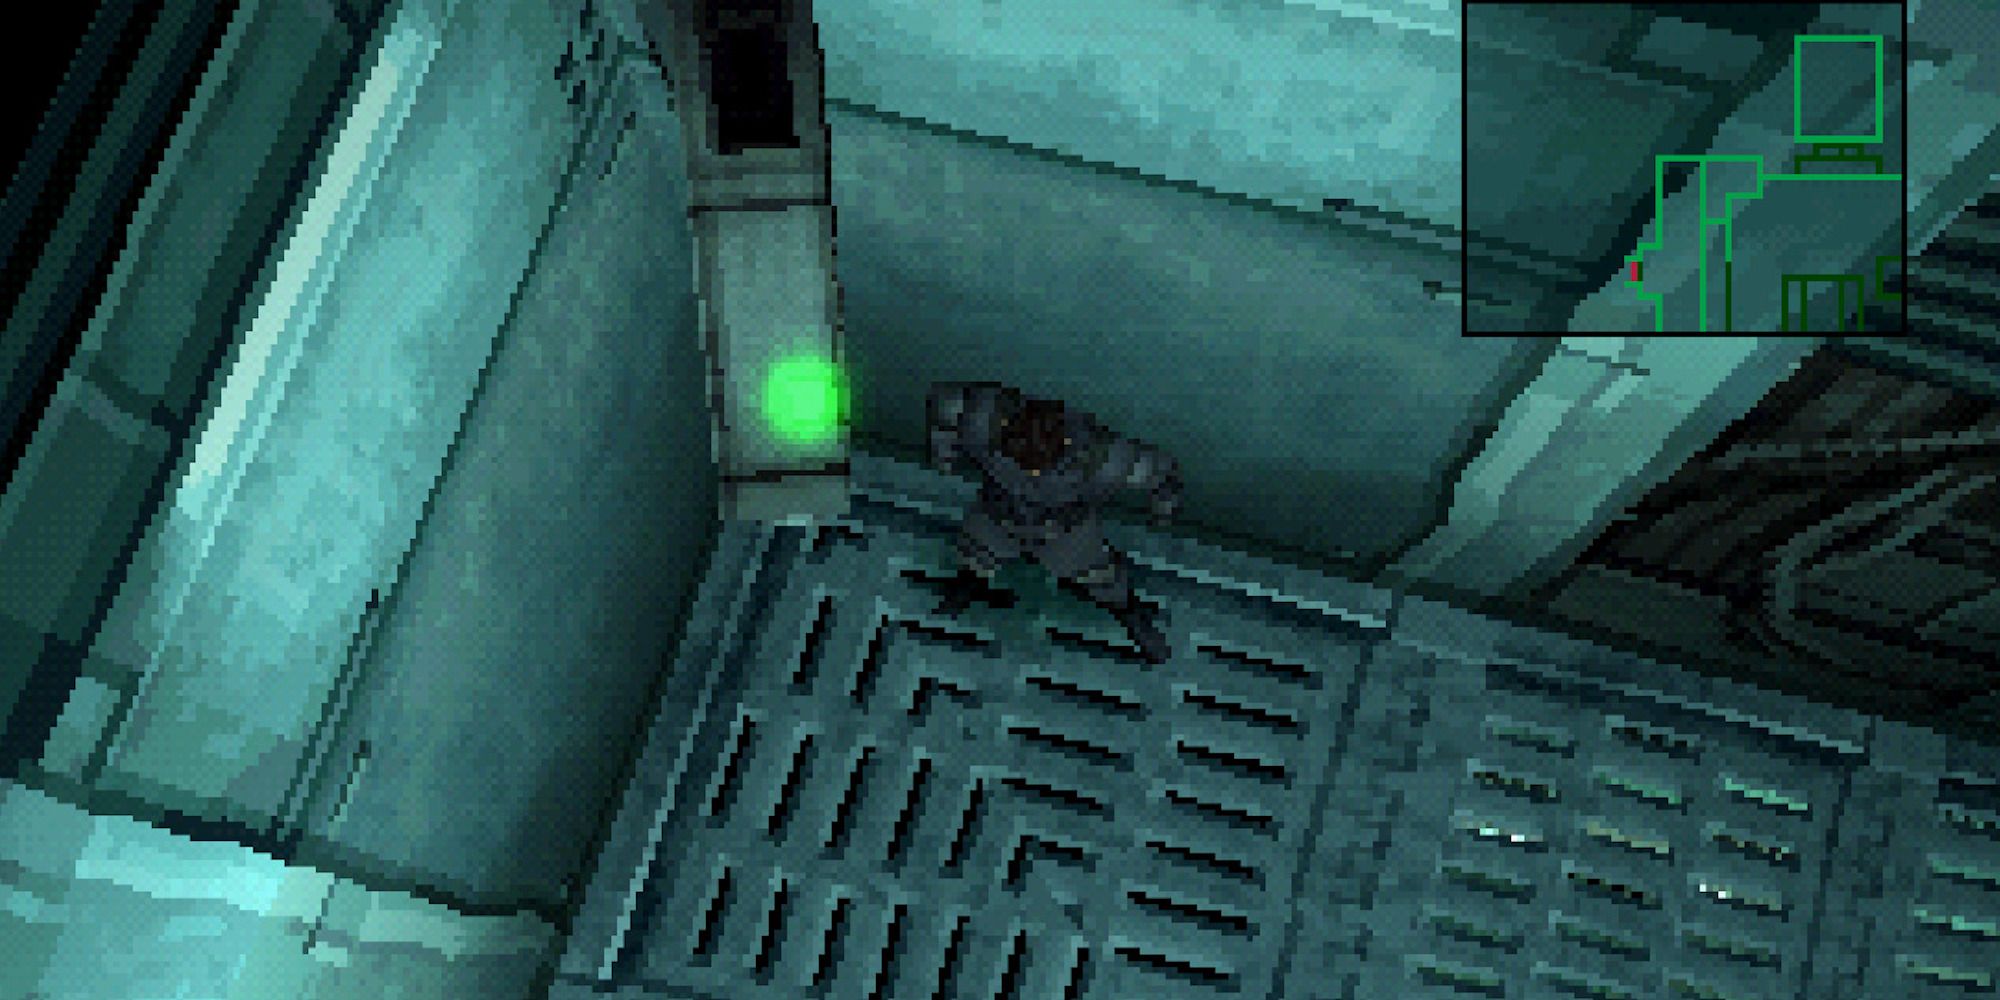 Screenshot from Metal Gear Solid 1 showing Solid Snake sneaking under a camera